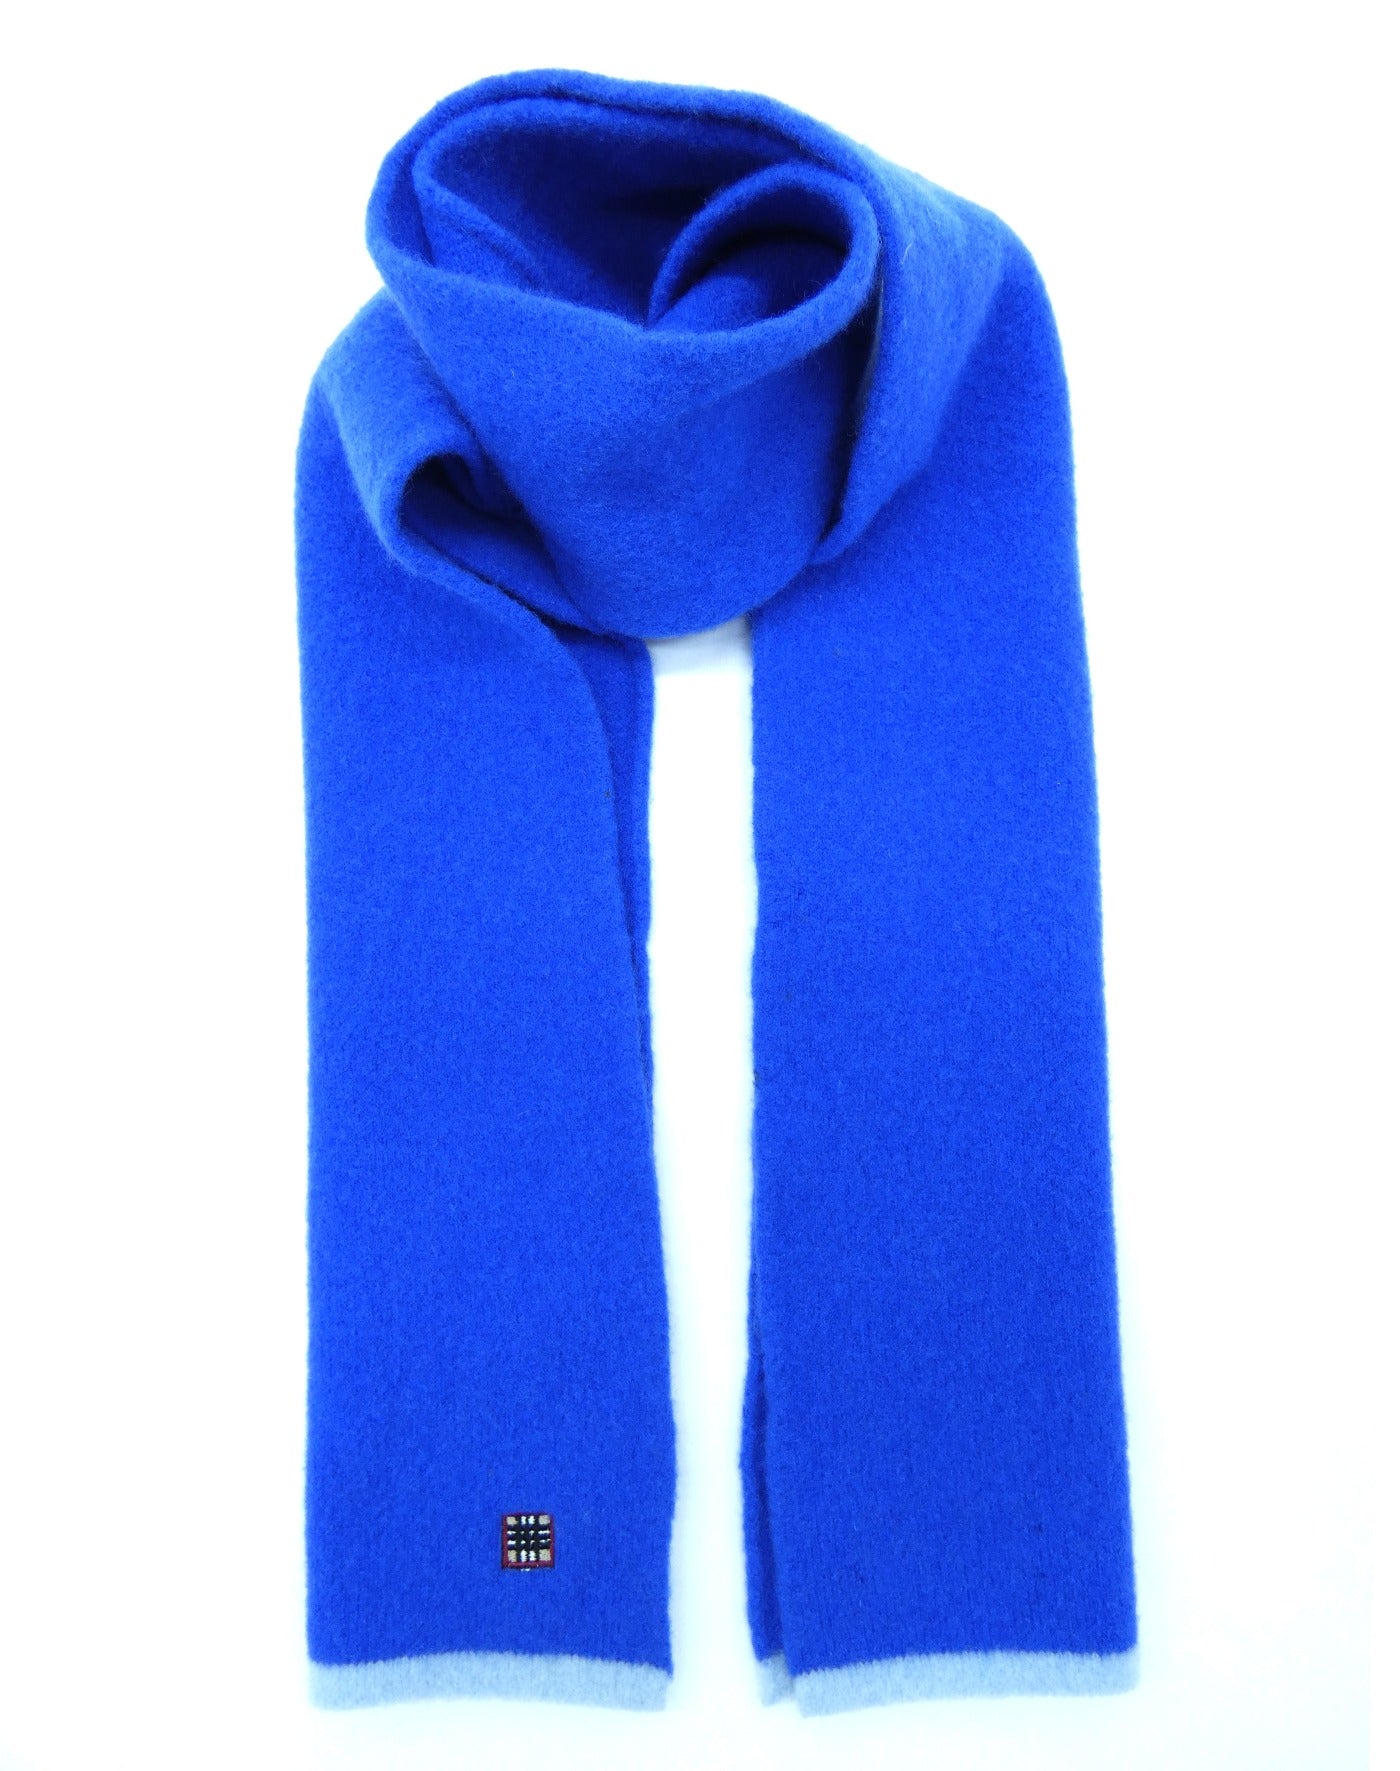 Burberry Lambswool Solid Blue Child's Scarf Scarf Burberry